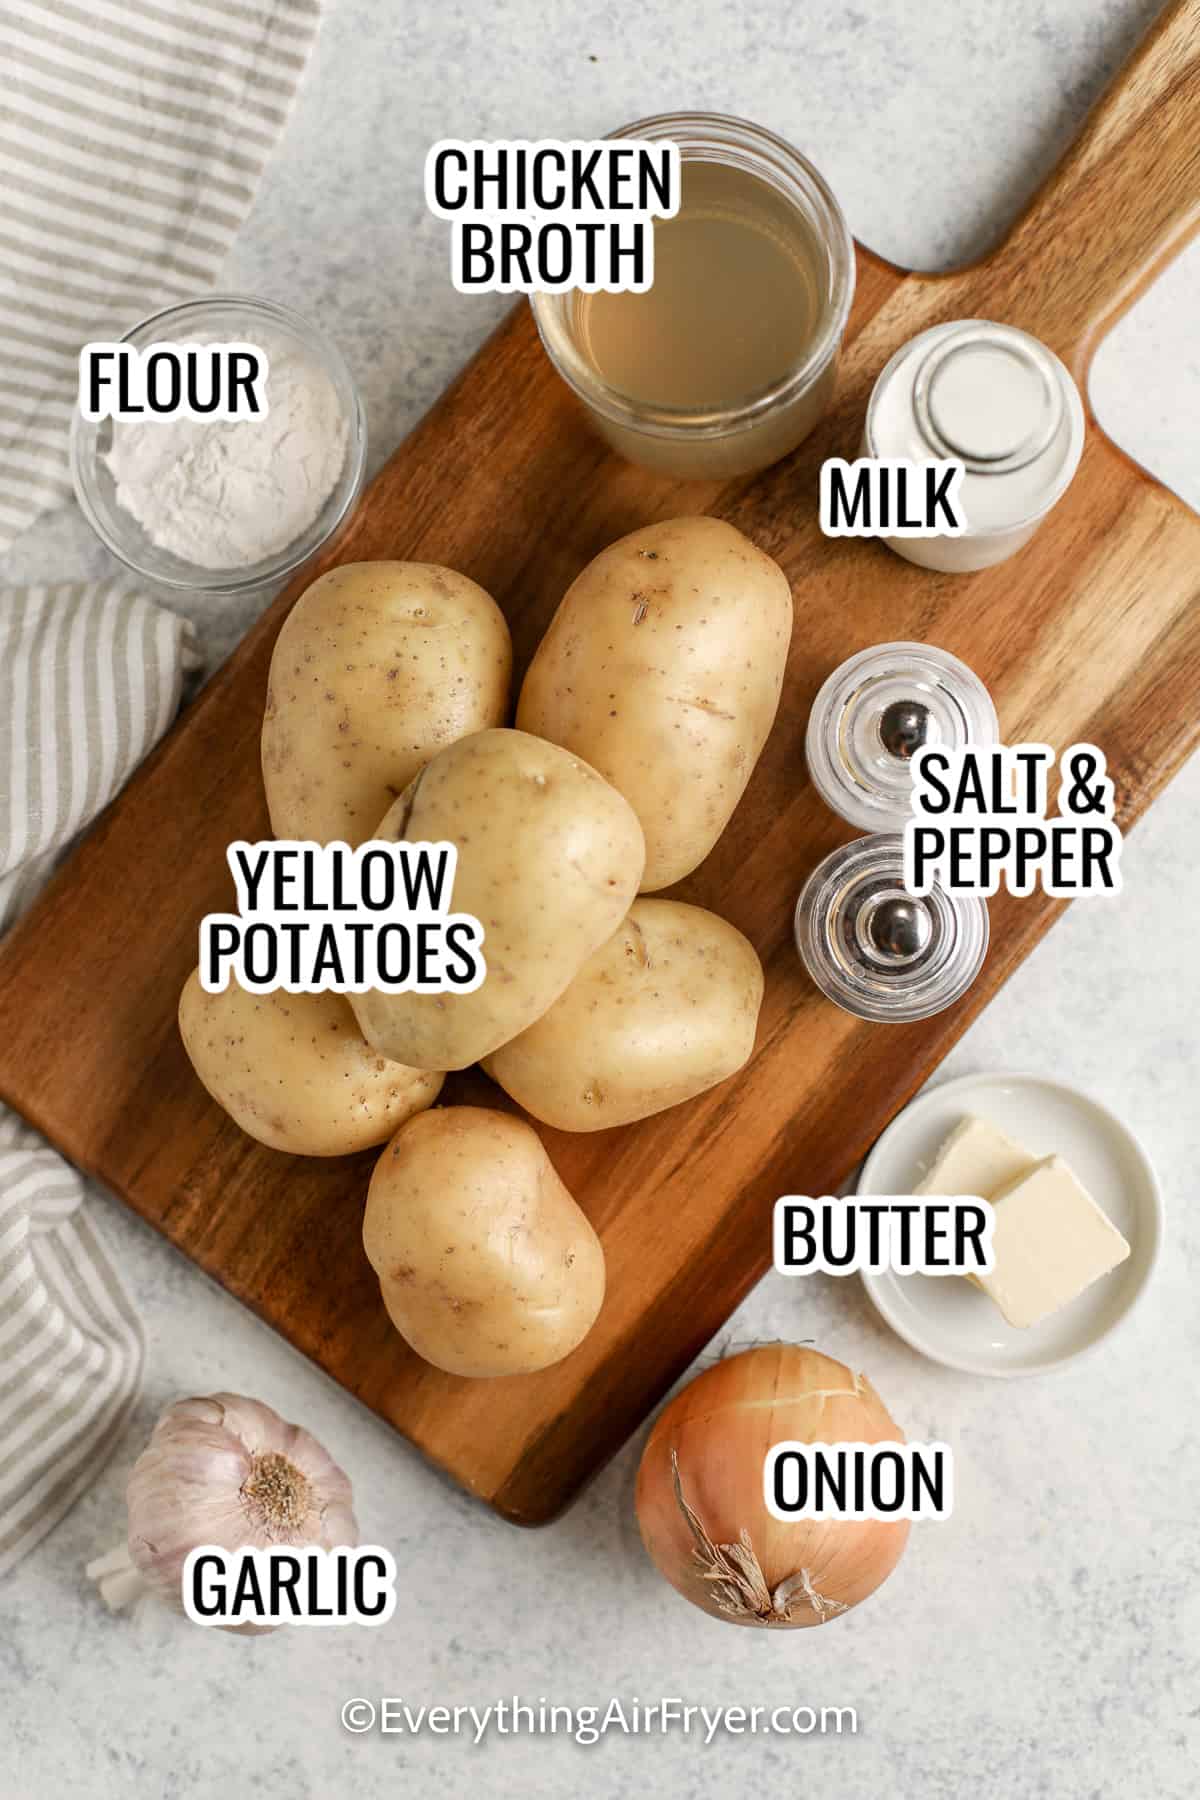 ingredients assembled to make air fryer scalloped potatoes, including potatoes, chicken broth, flour, onion, garlic, butter, and milk